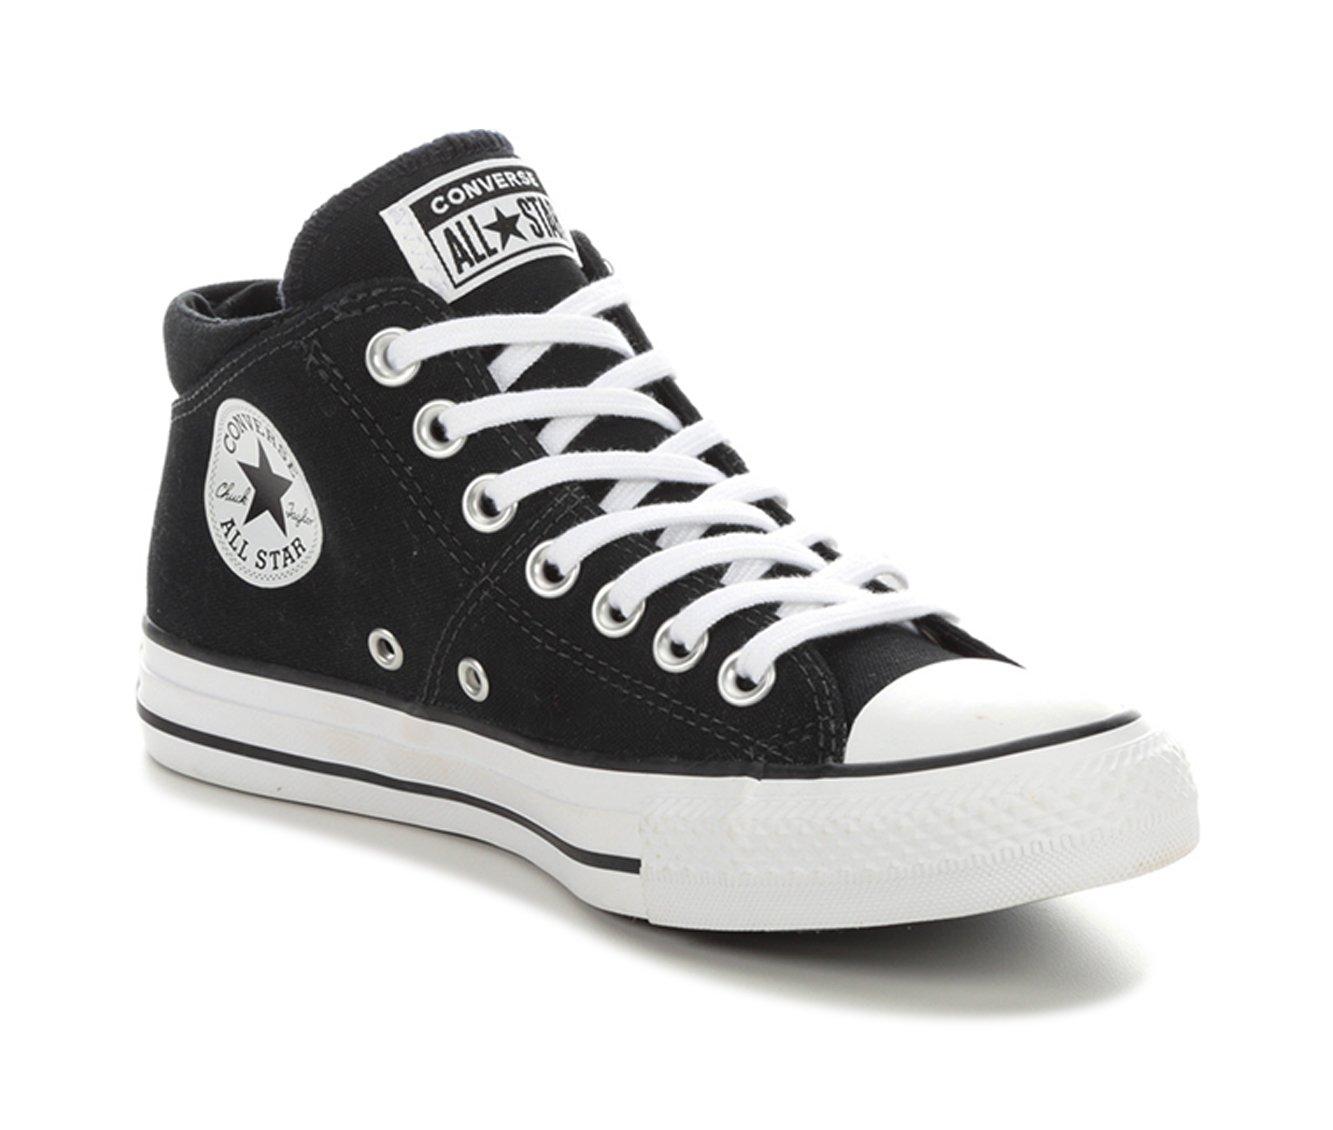 Women's Converse Chuck Taylor All Star Madison Mid-Top Sneakers